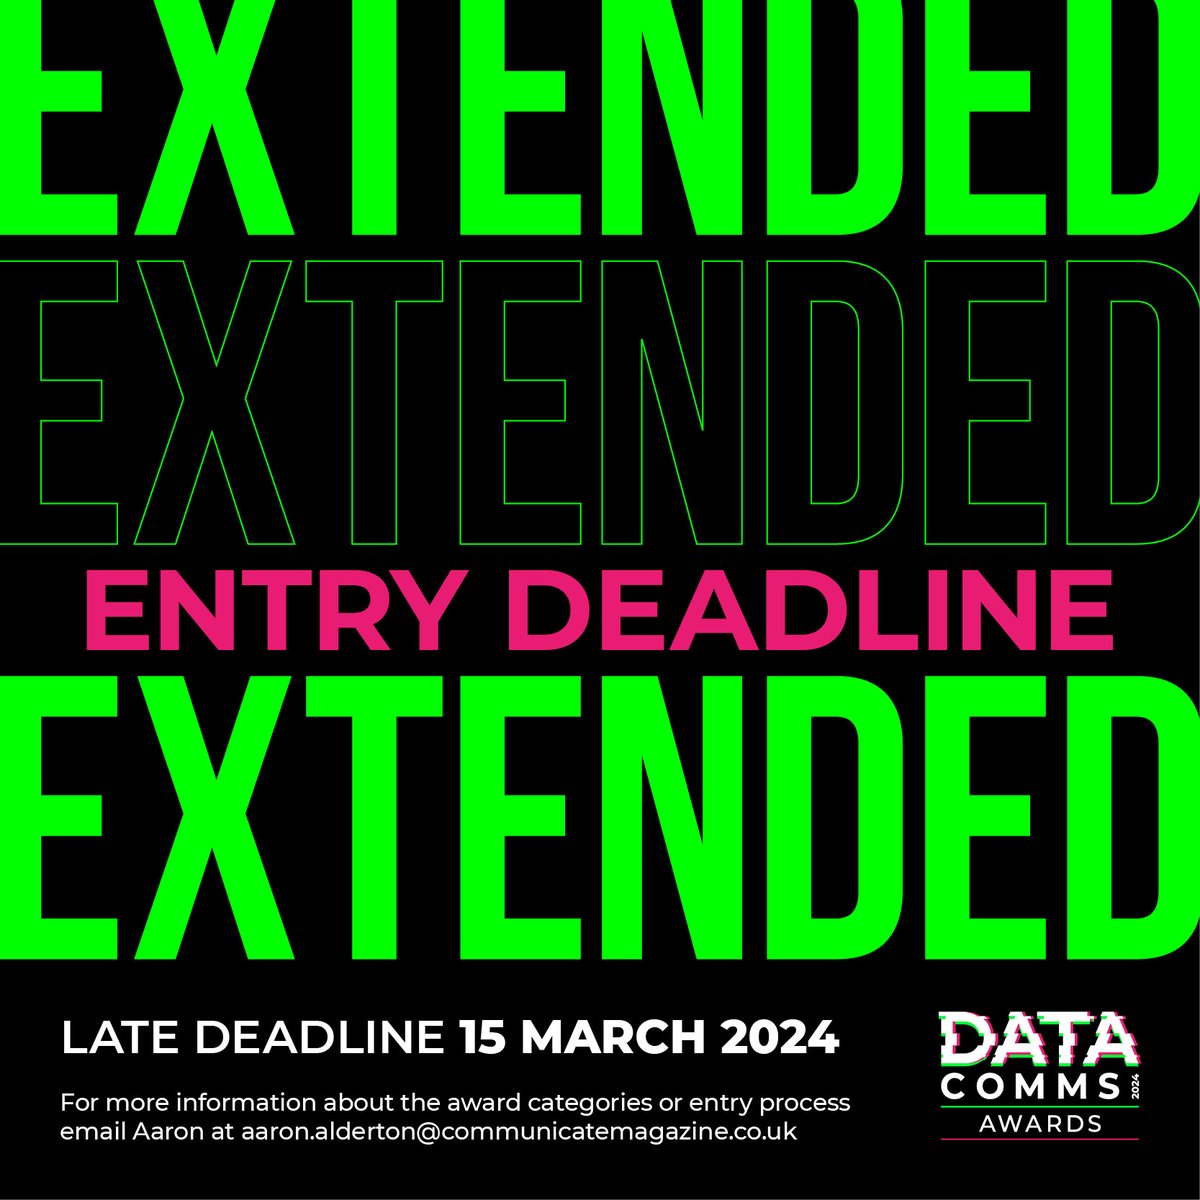 Exciting announcement! The DataComms Awards deadline has been extended to 15 March!📢

Entry guide 👉 bit.ly/48ka8tG
Enter now 👉 bit.ly/3RY4Yxb

If you have any questions please contact Aaron at aaron.alderton@communicatemagazine.co.uk
#DataComms